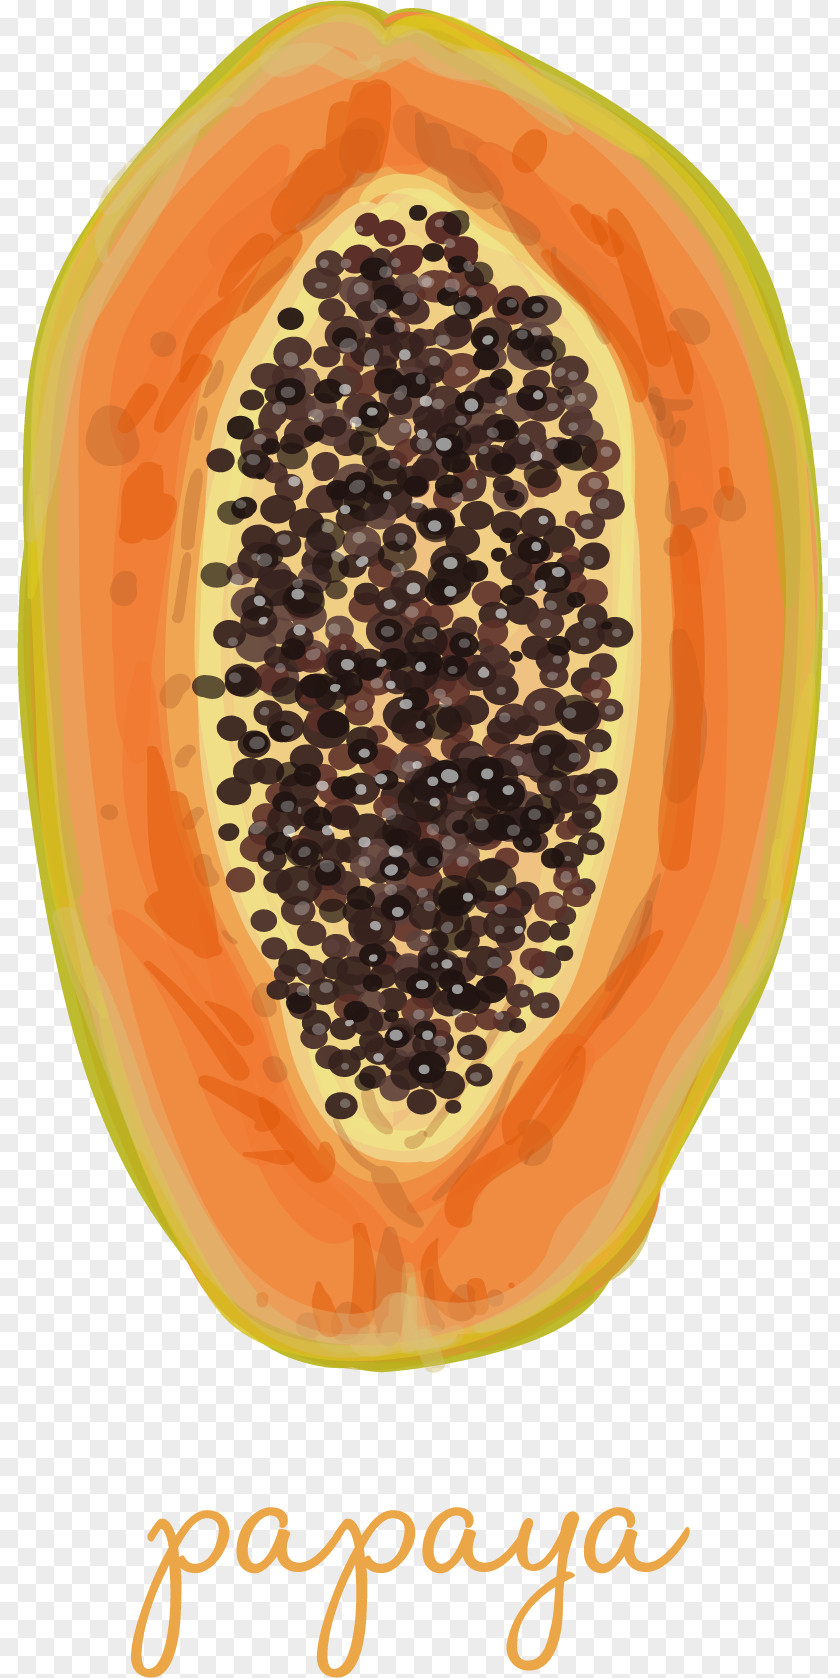 Nutrition Delicious Papaya Fruit Poster PNG